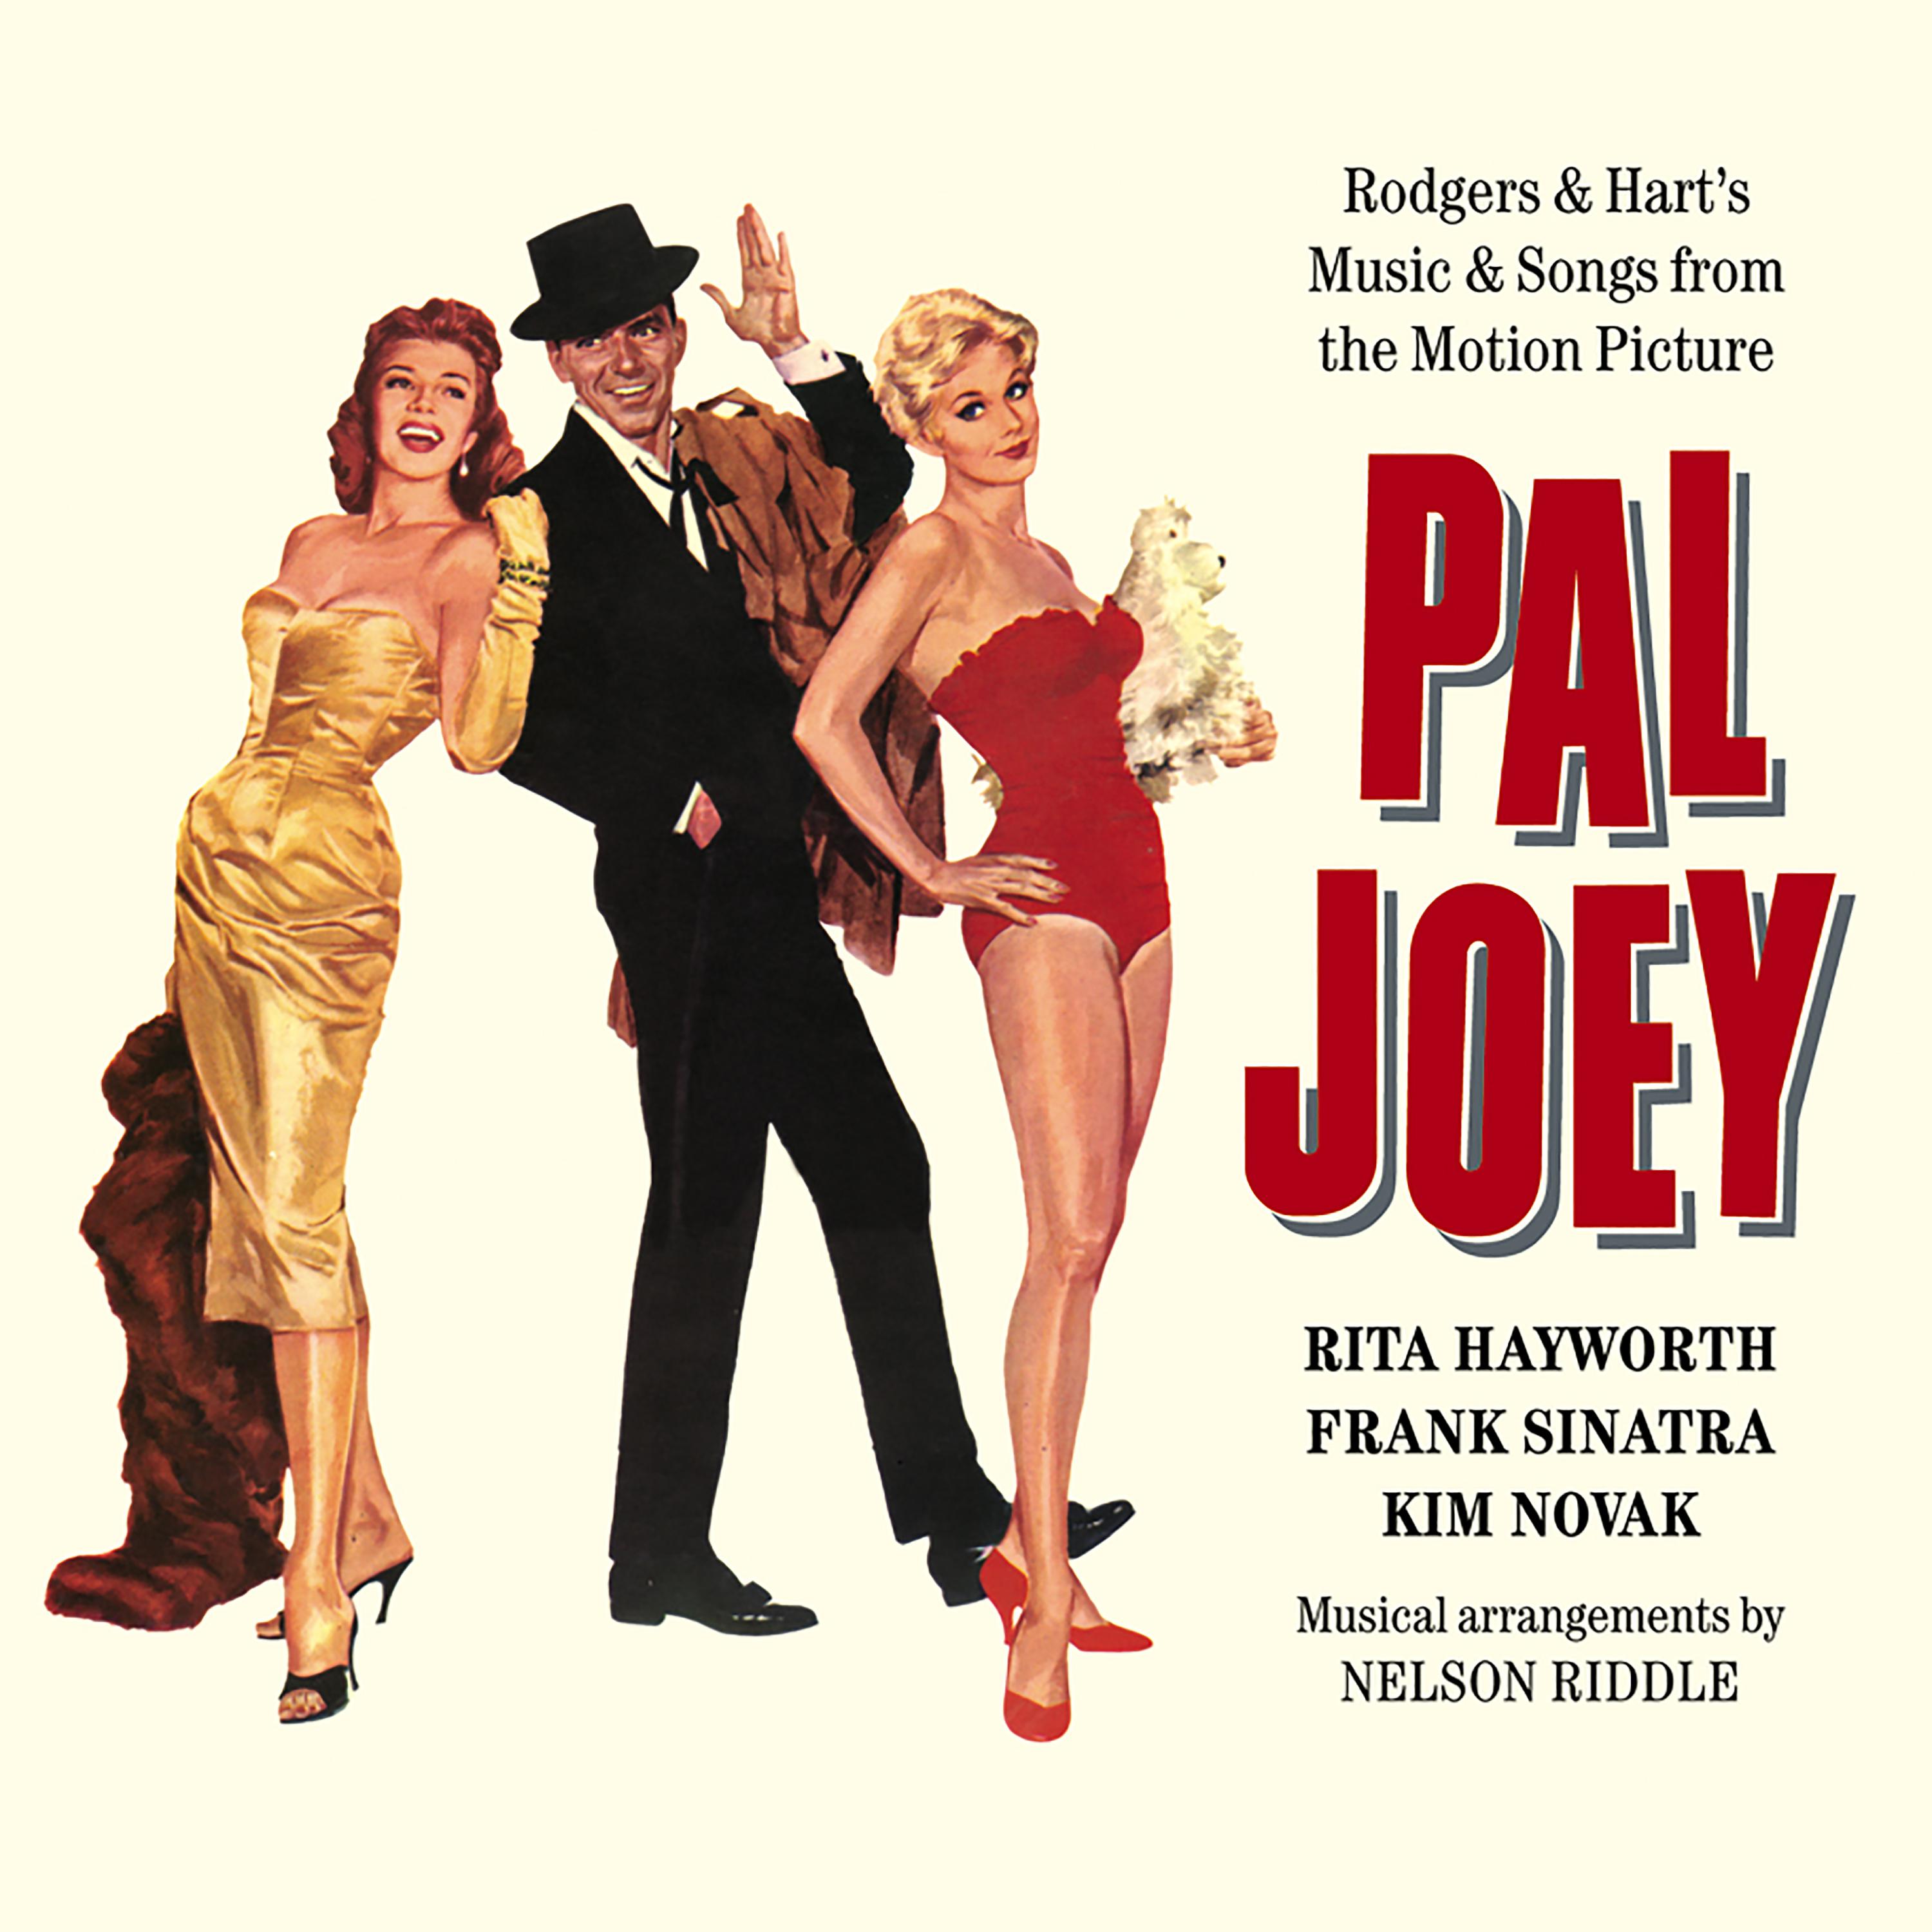 Frank Sinatra - Dream Sequence & Finale (Joey, Orchestra and Chorus)